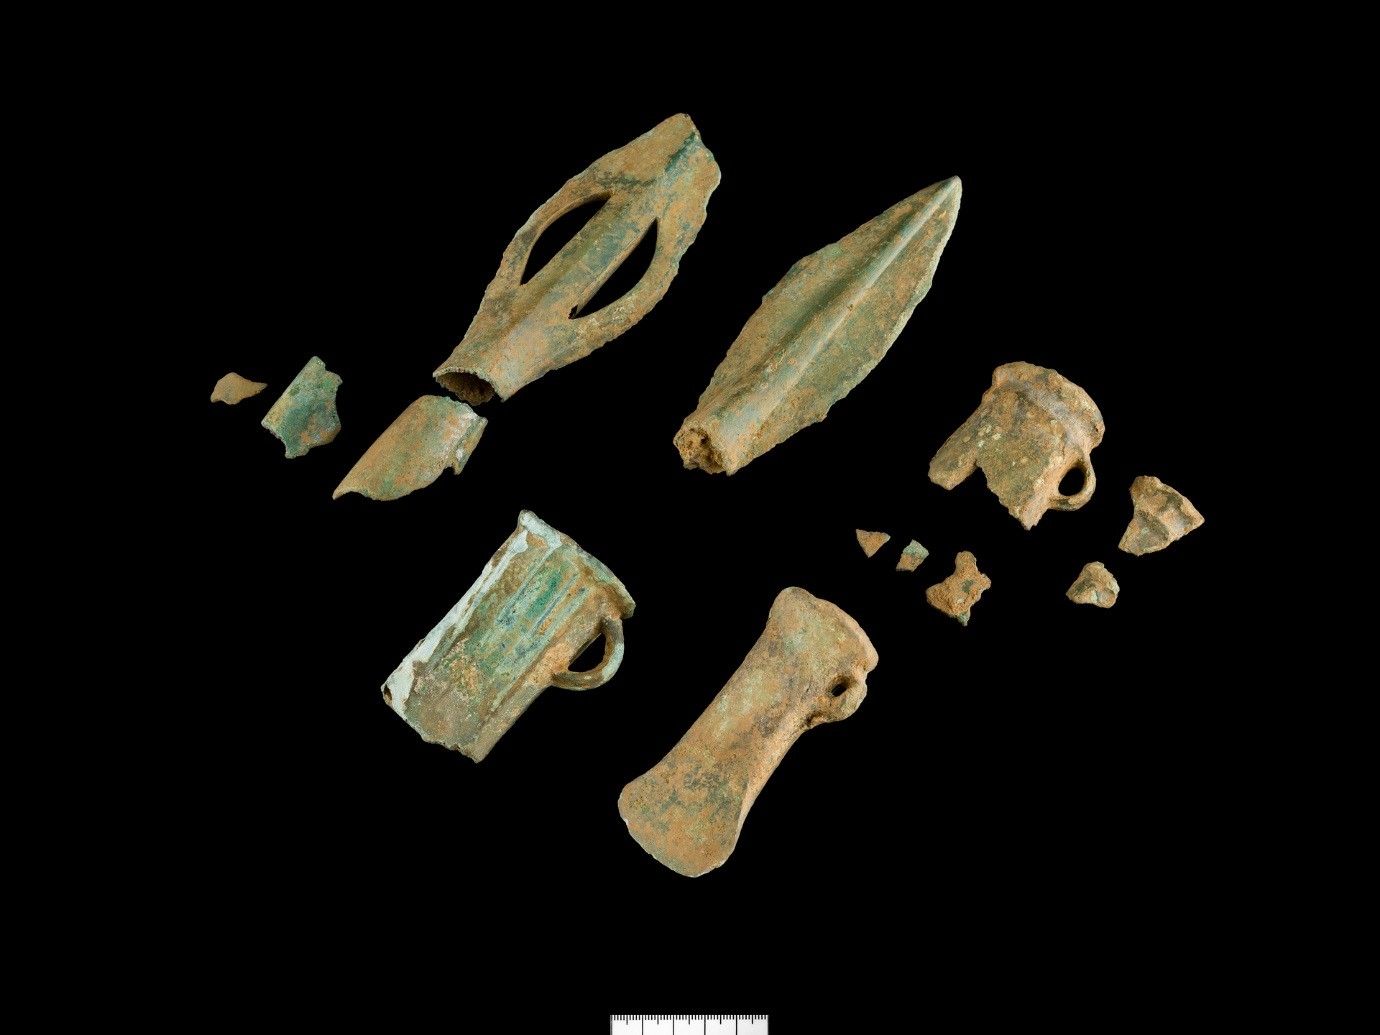 This is a Bronze Age hoard of axe heads which were found in Torfaen